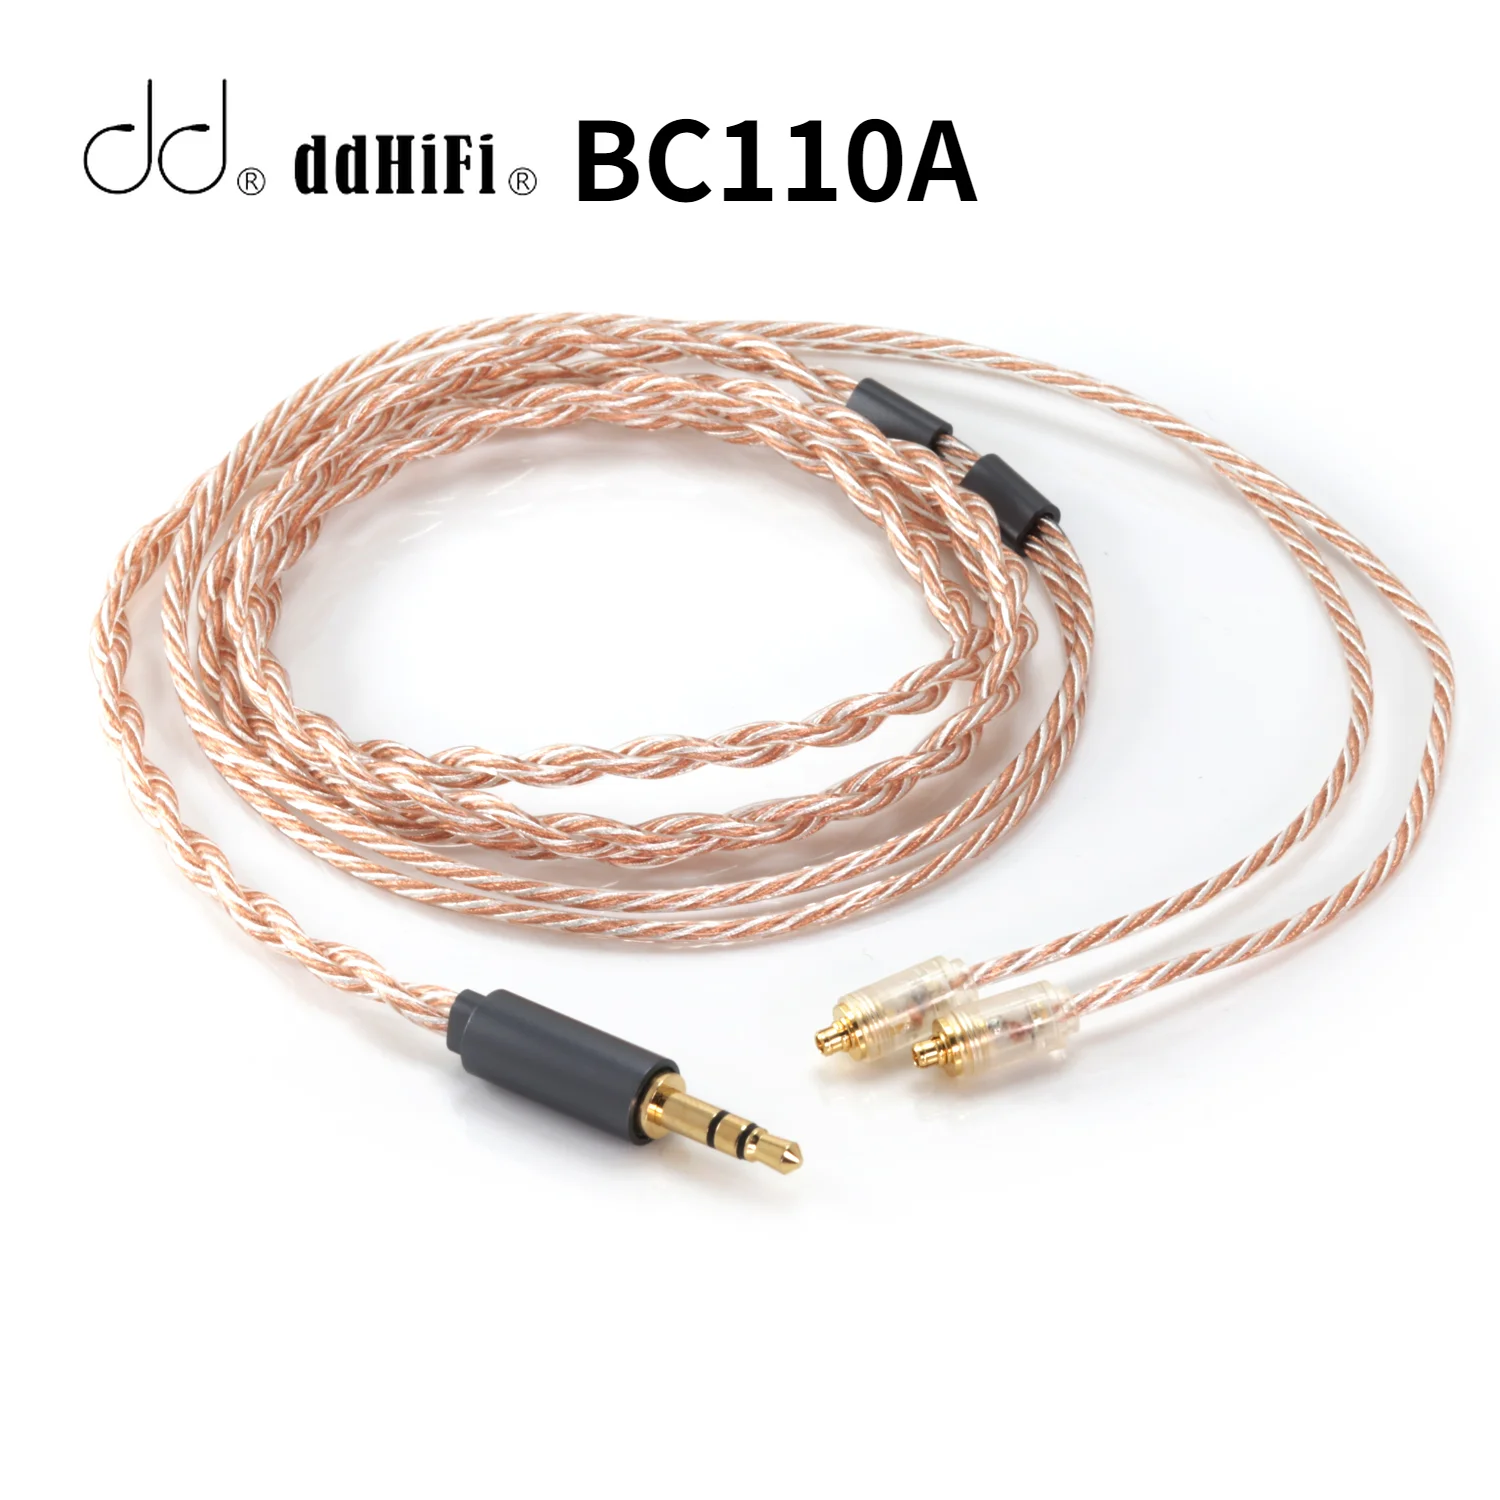 

DD ddHiFi BC110A Stock Earphone Cable of E2020B (Janus2) with High-Purity Silver-Plated OFC, 3.5mm Plug and MMCX Connector